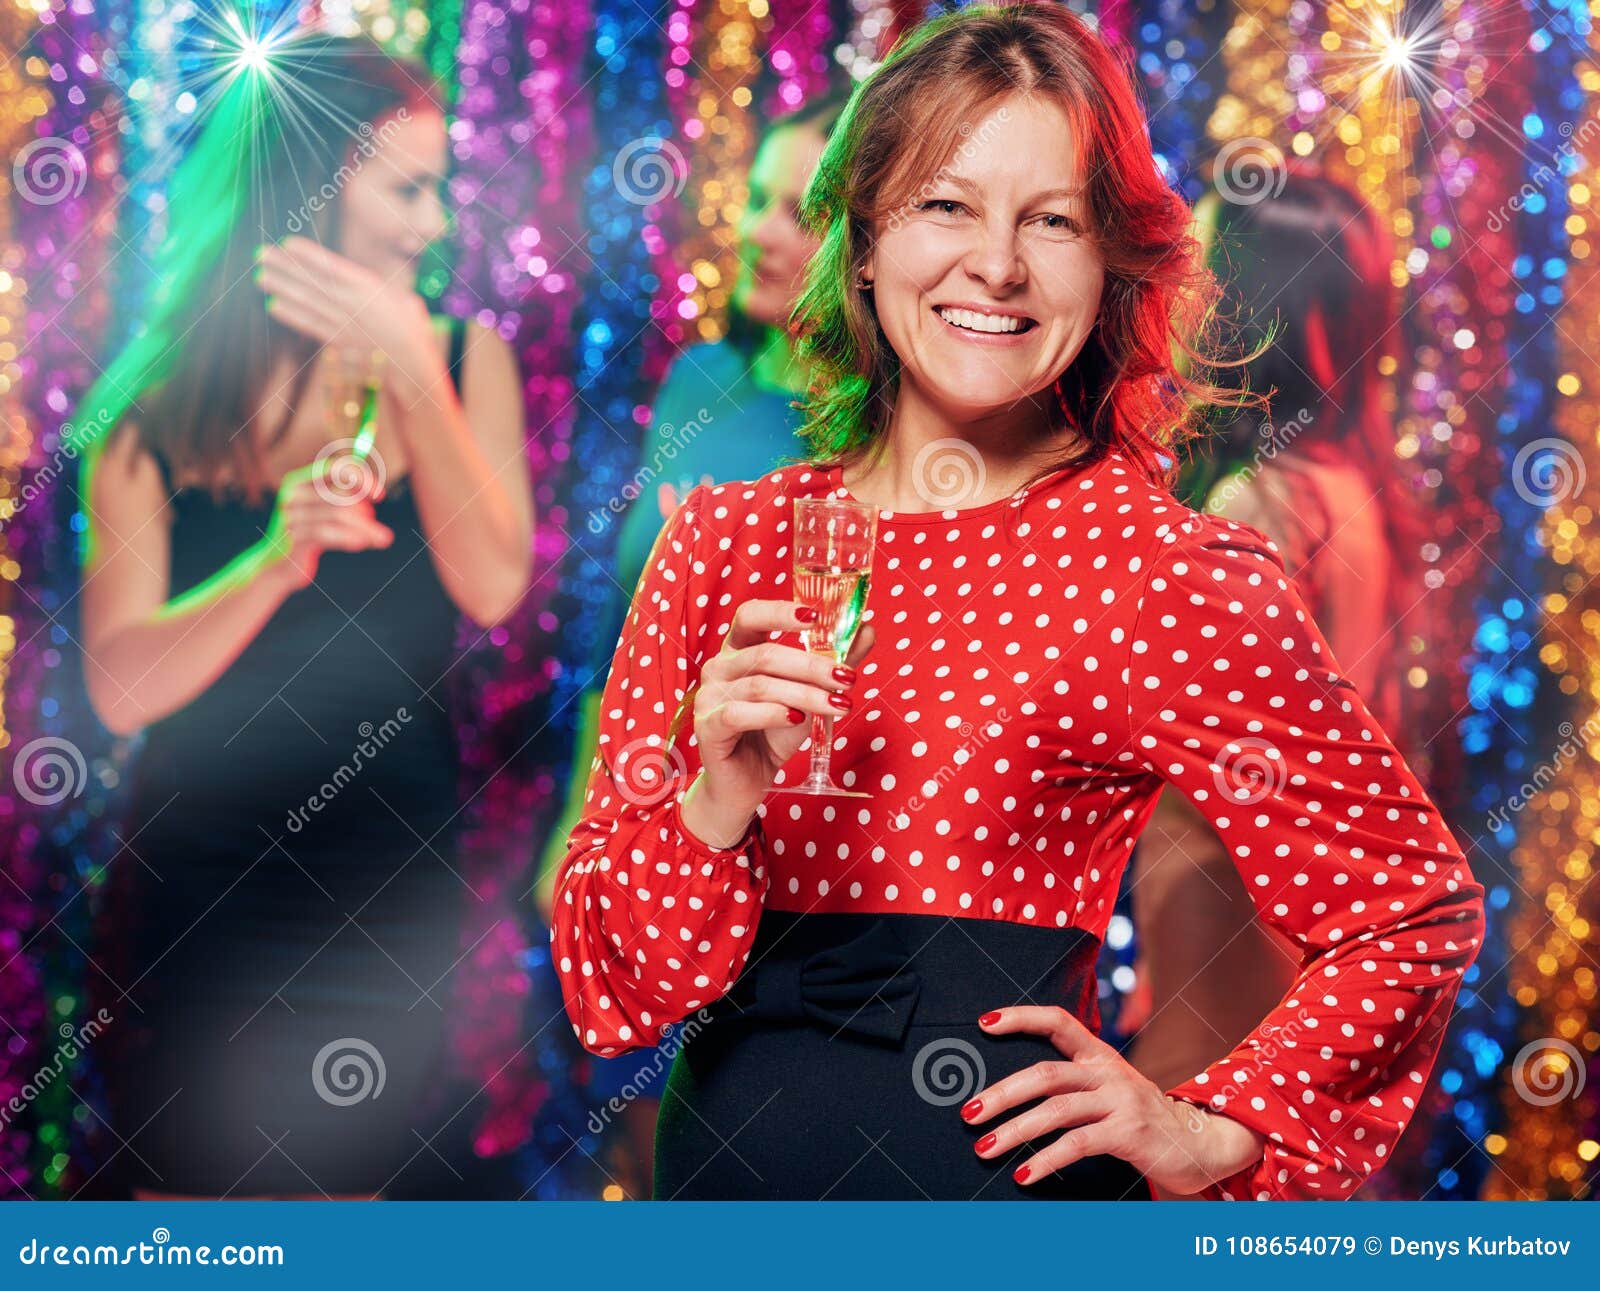 Party in night club stock image. Image of girlfriends - 108654079